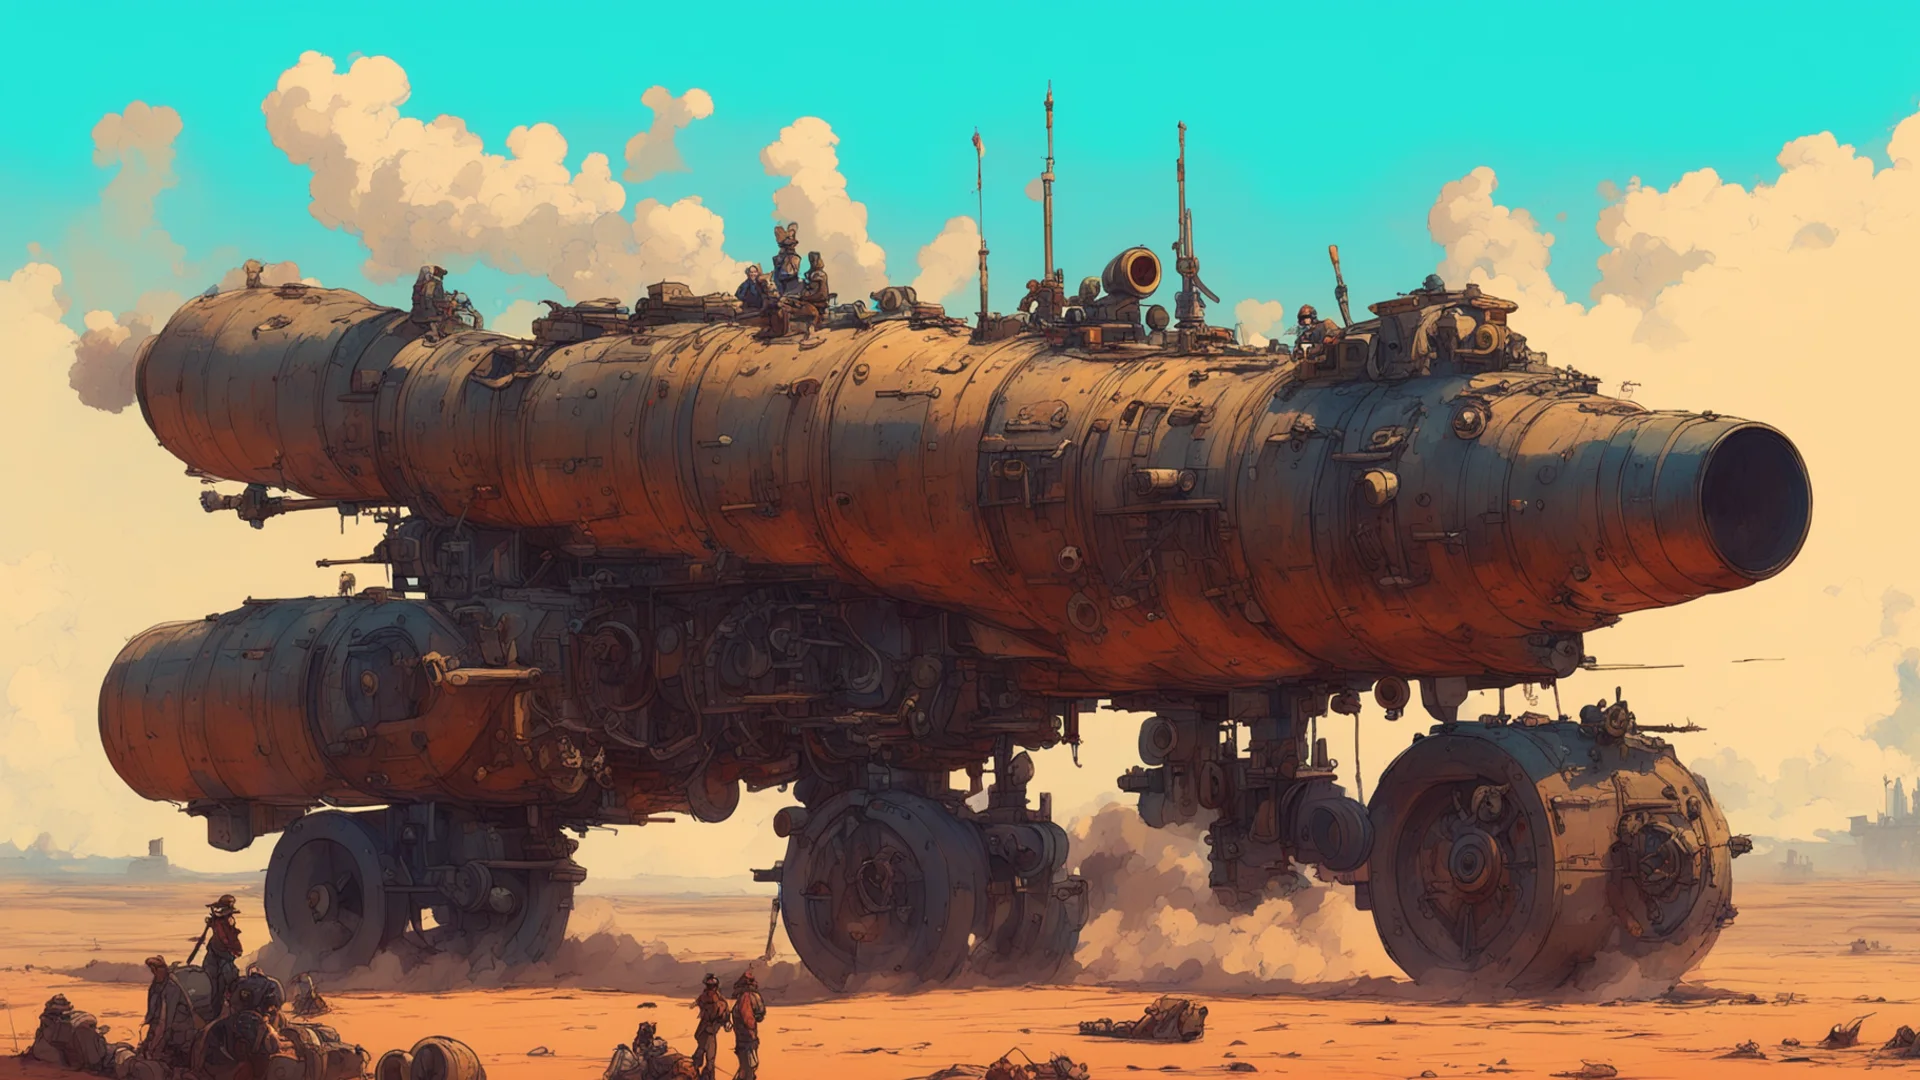 artstation art a smoking cannon designed by george lucas on a battlefield moebius ghibli ian mcque wallpaper confident engaging wow 3 wide